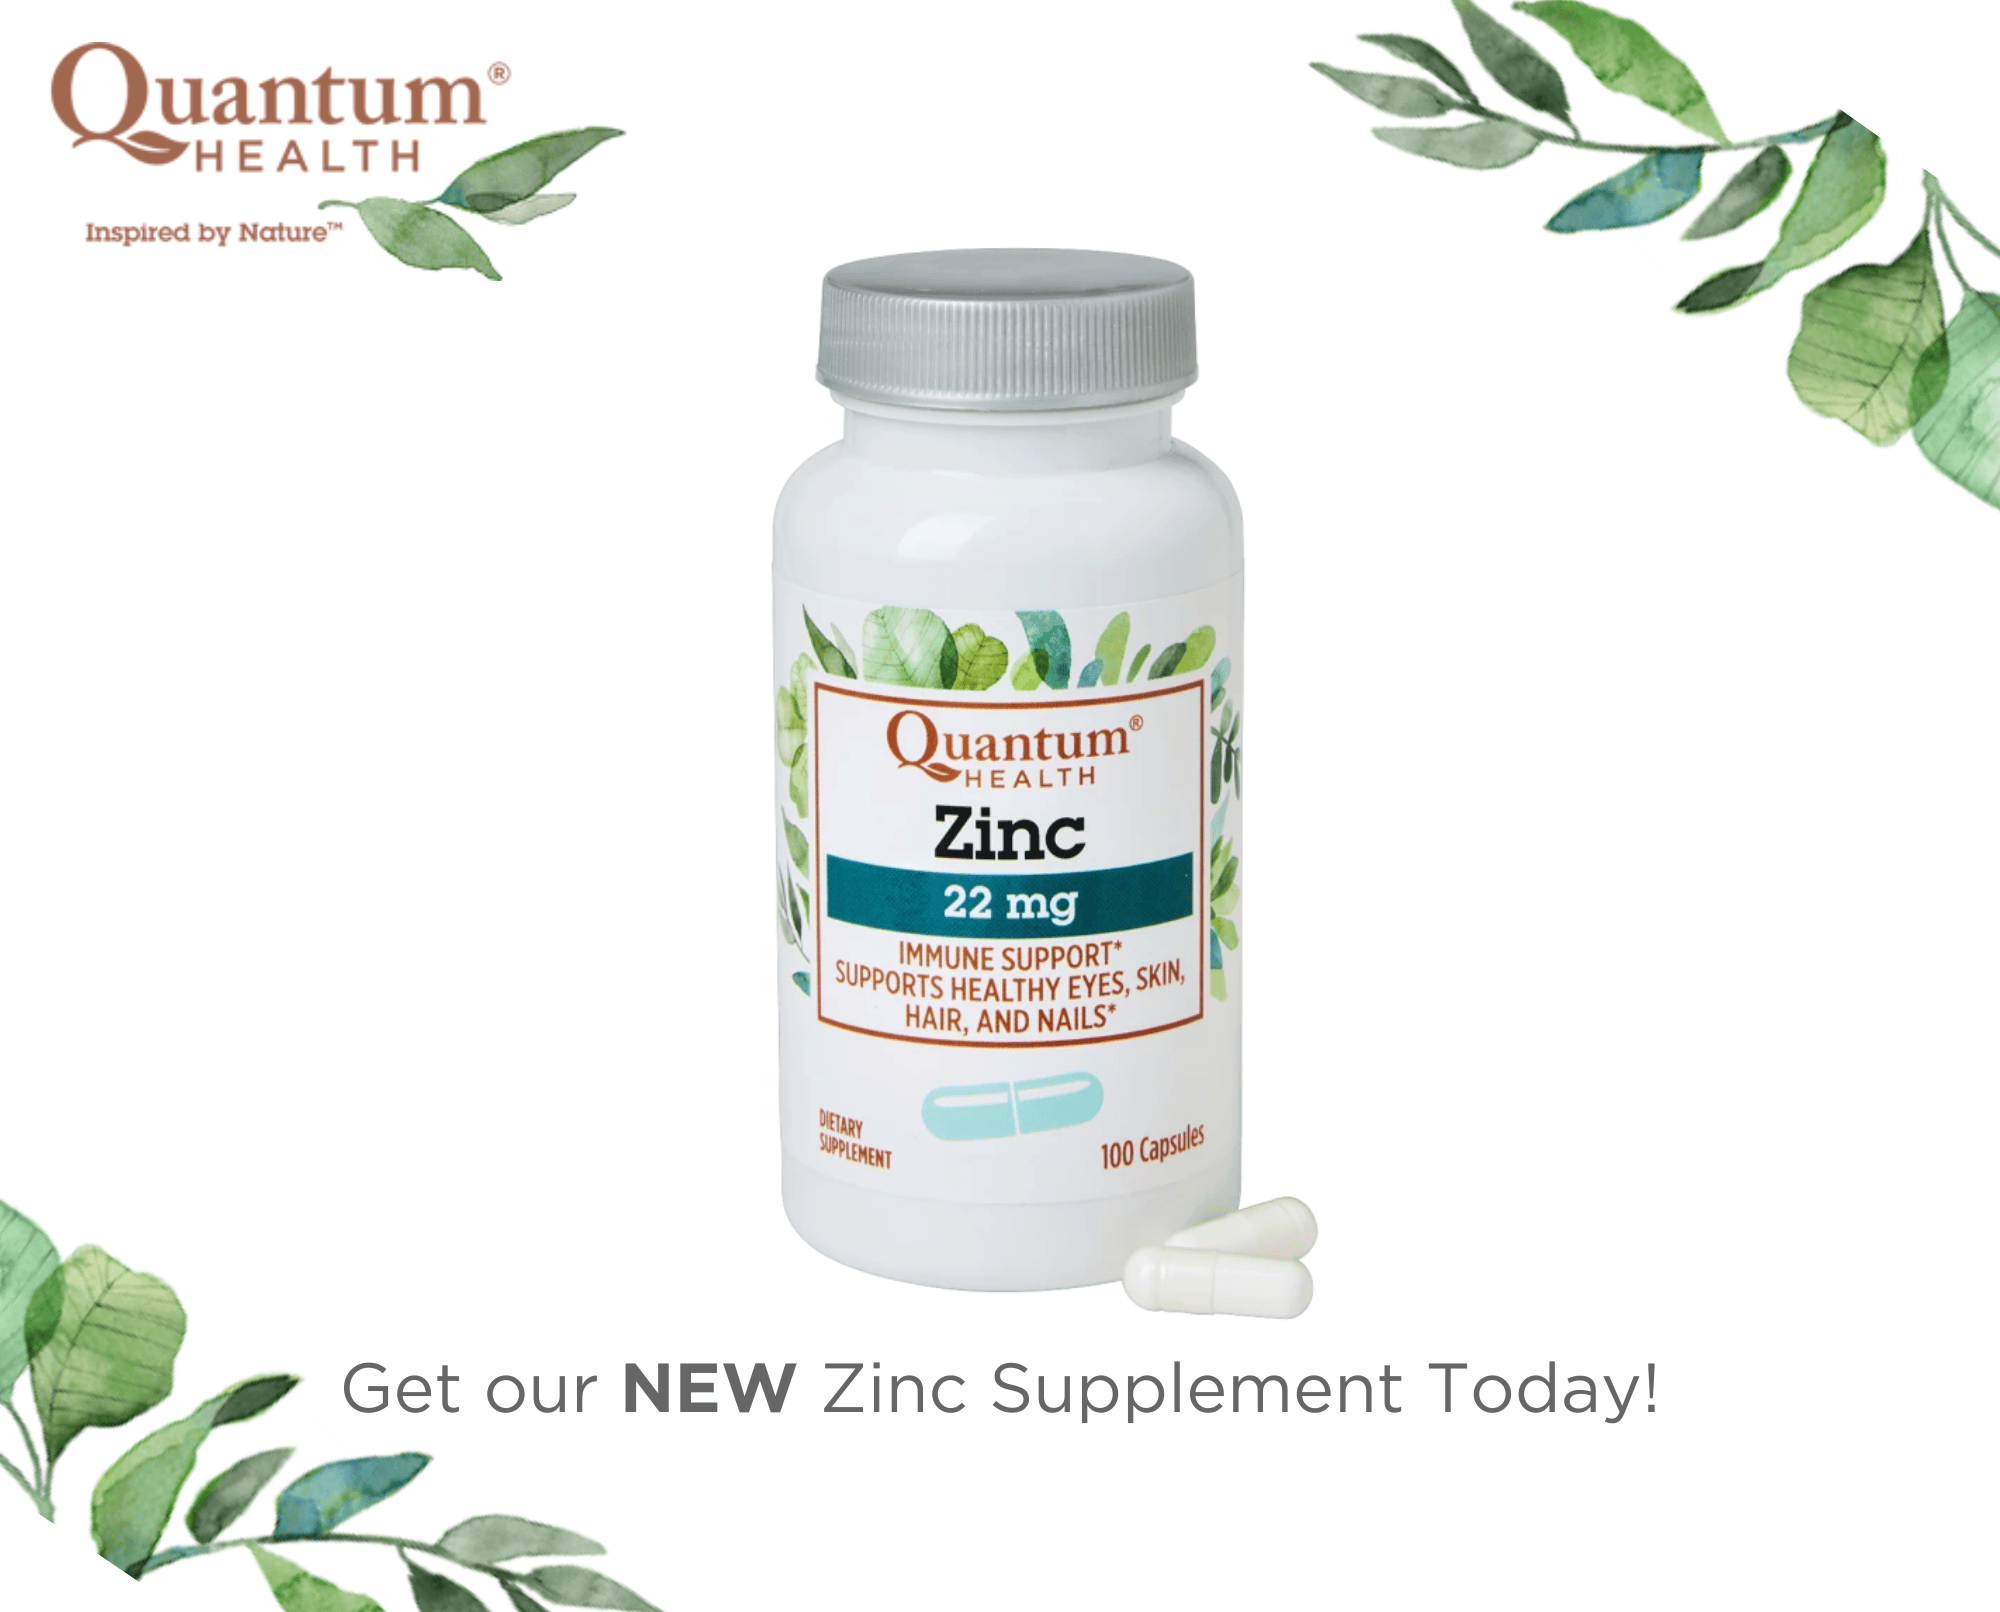 Get our NEW Zinc Supplement Today!